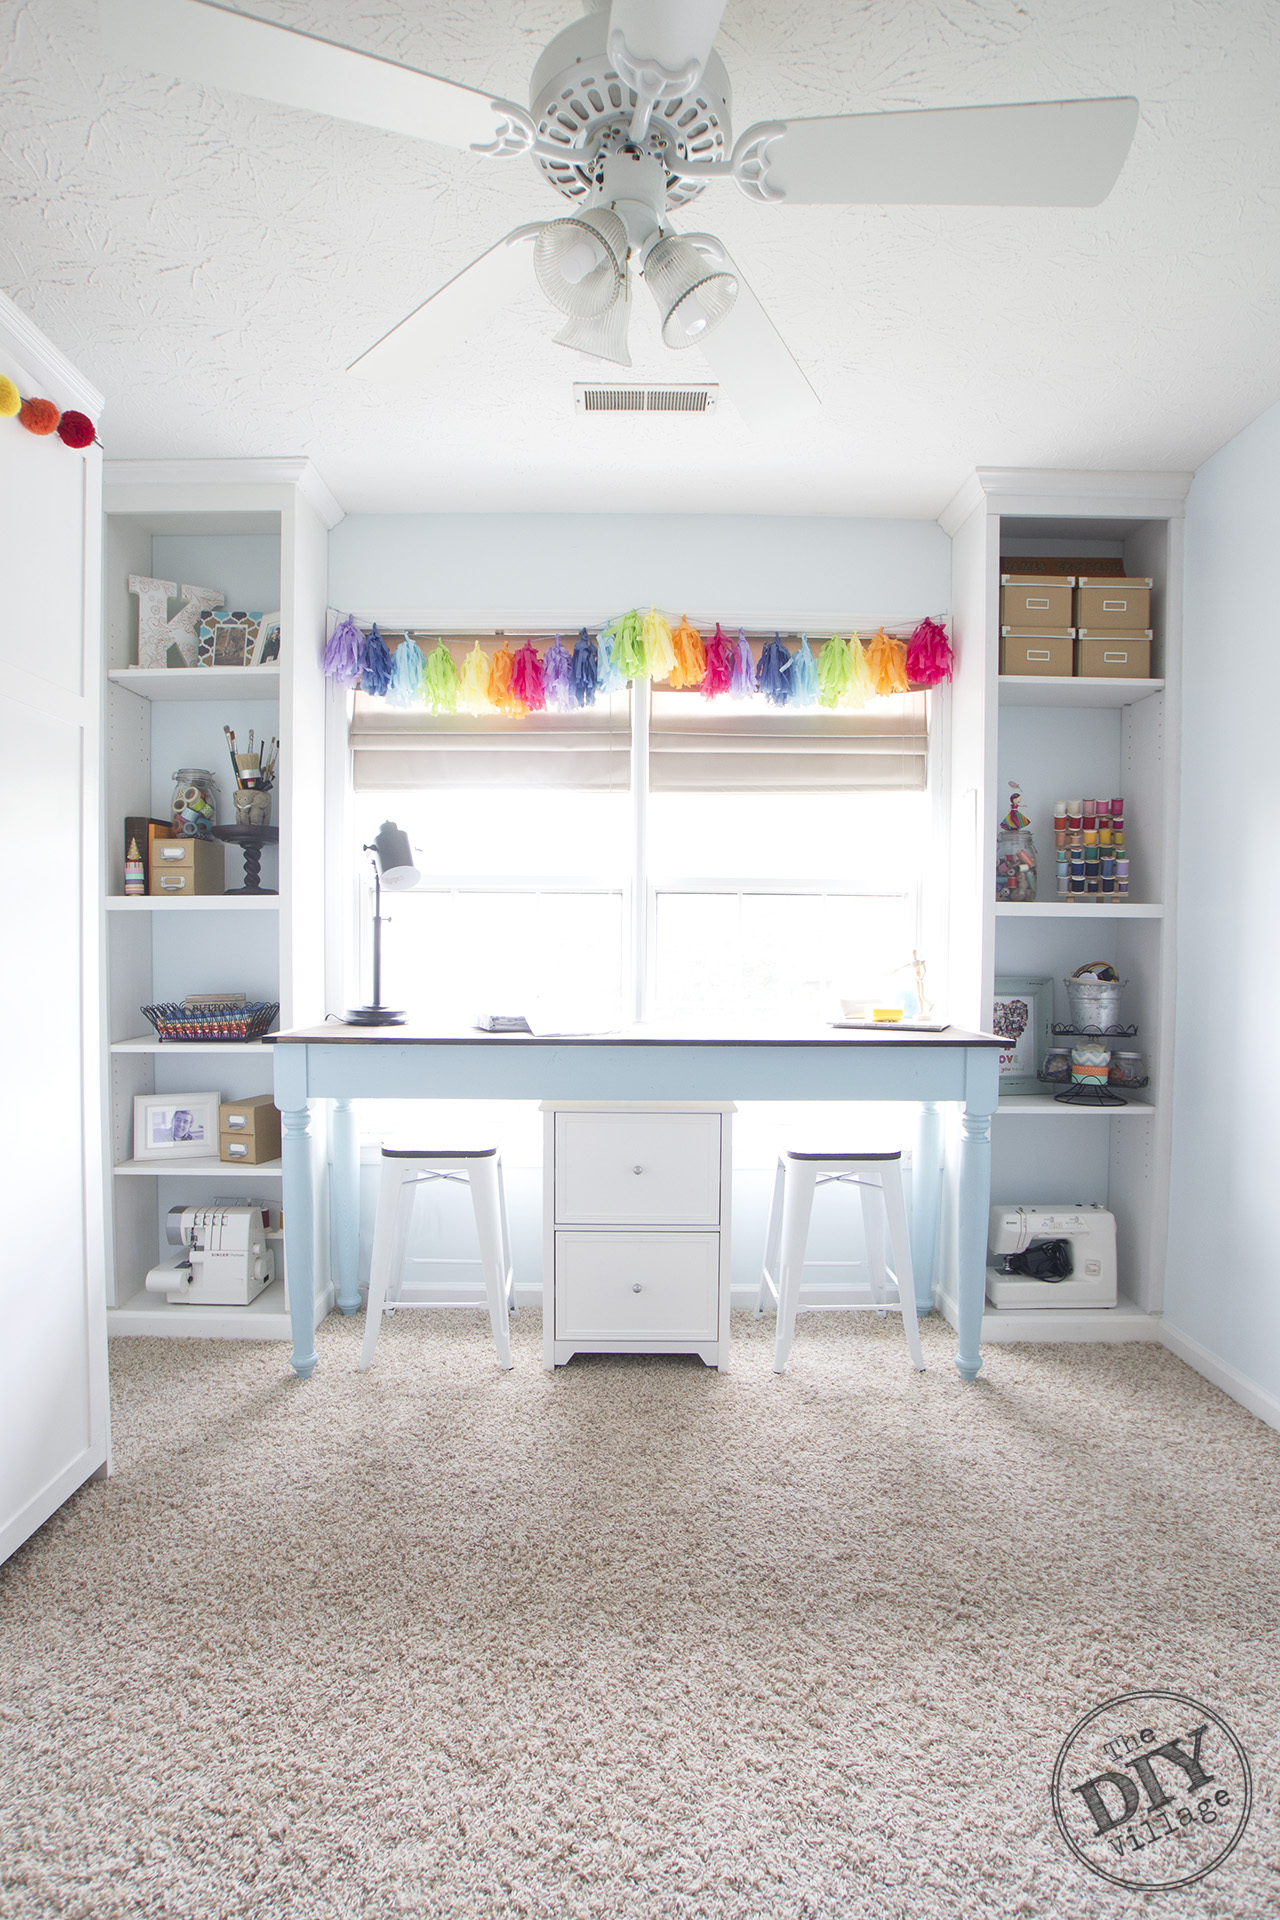 Amazing craft room makeover for under $200.